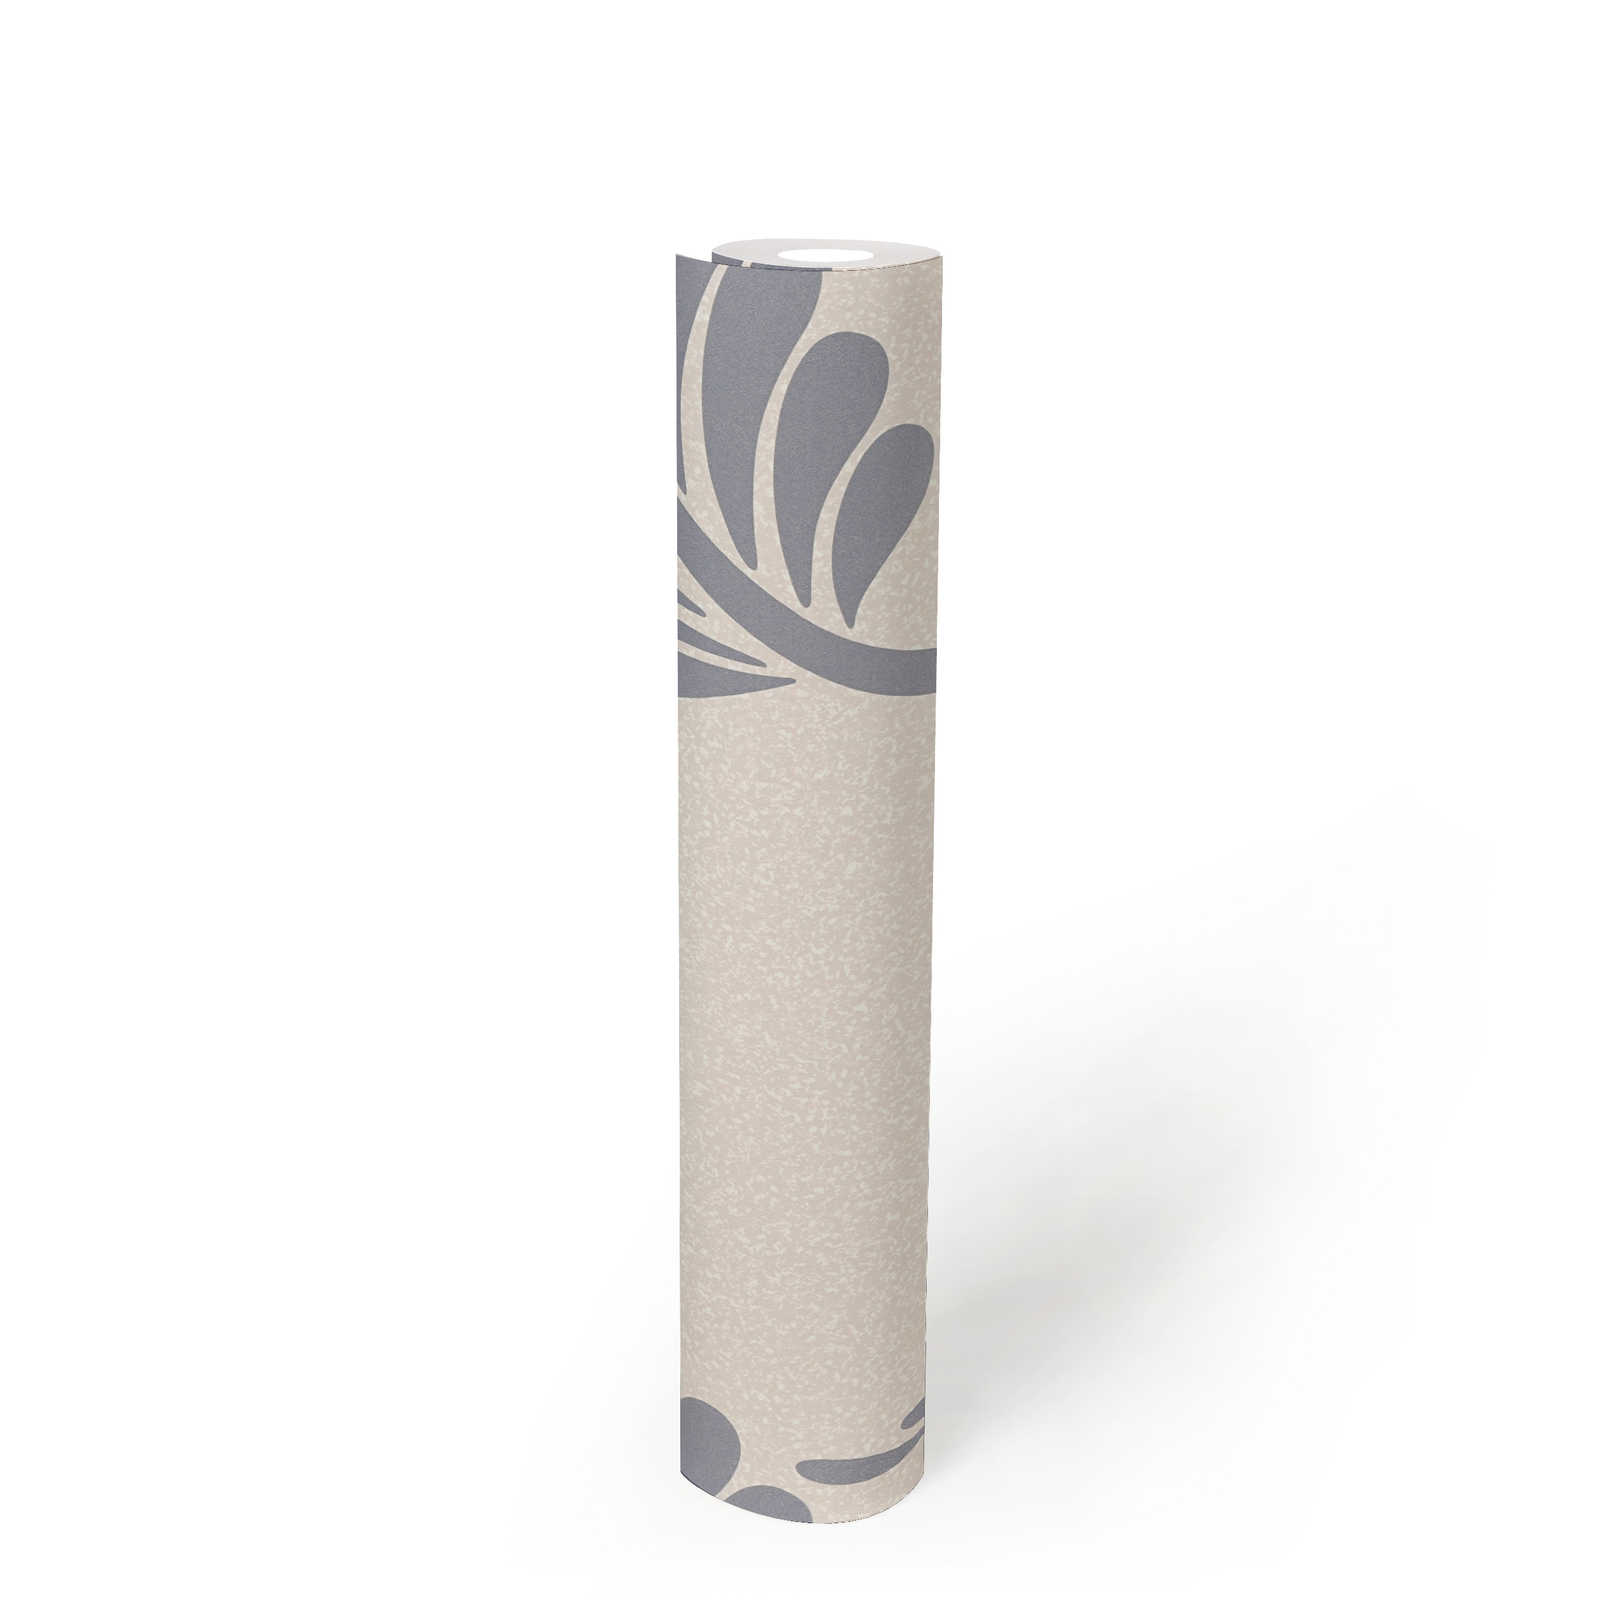             Paper wallpaper with leaves in floral style glossy - Greige, Silver
        